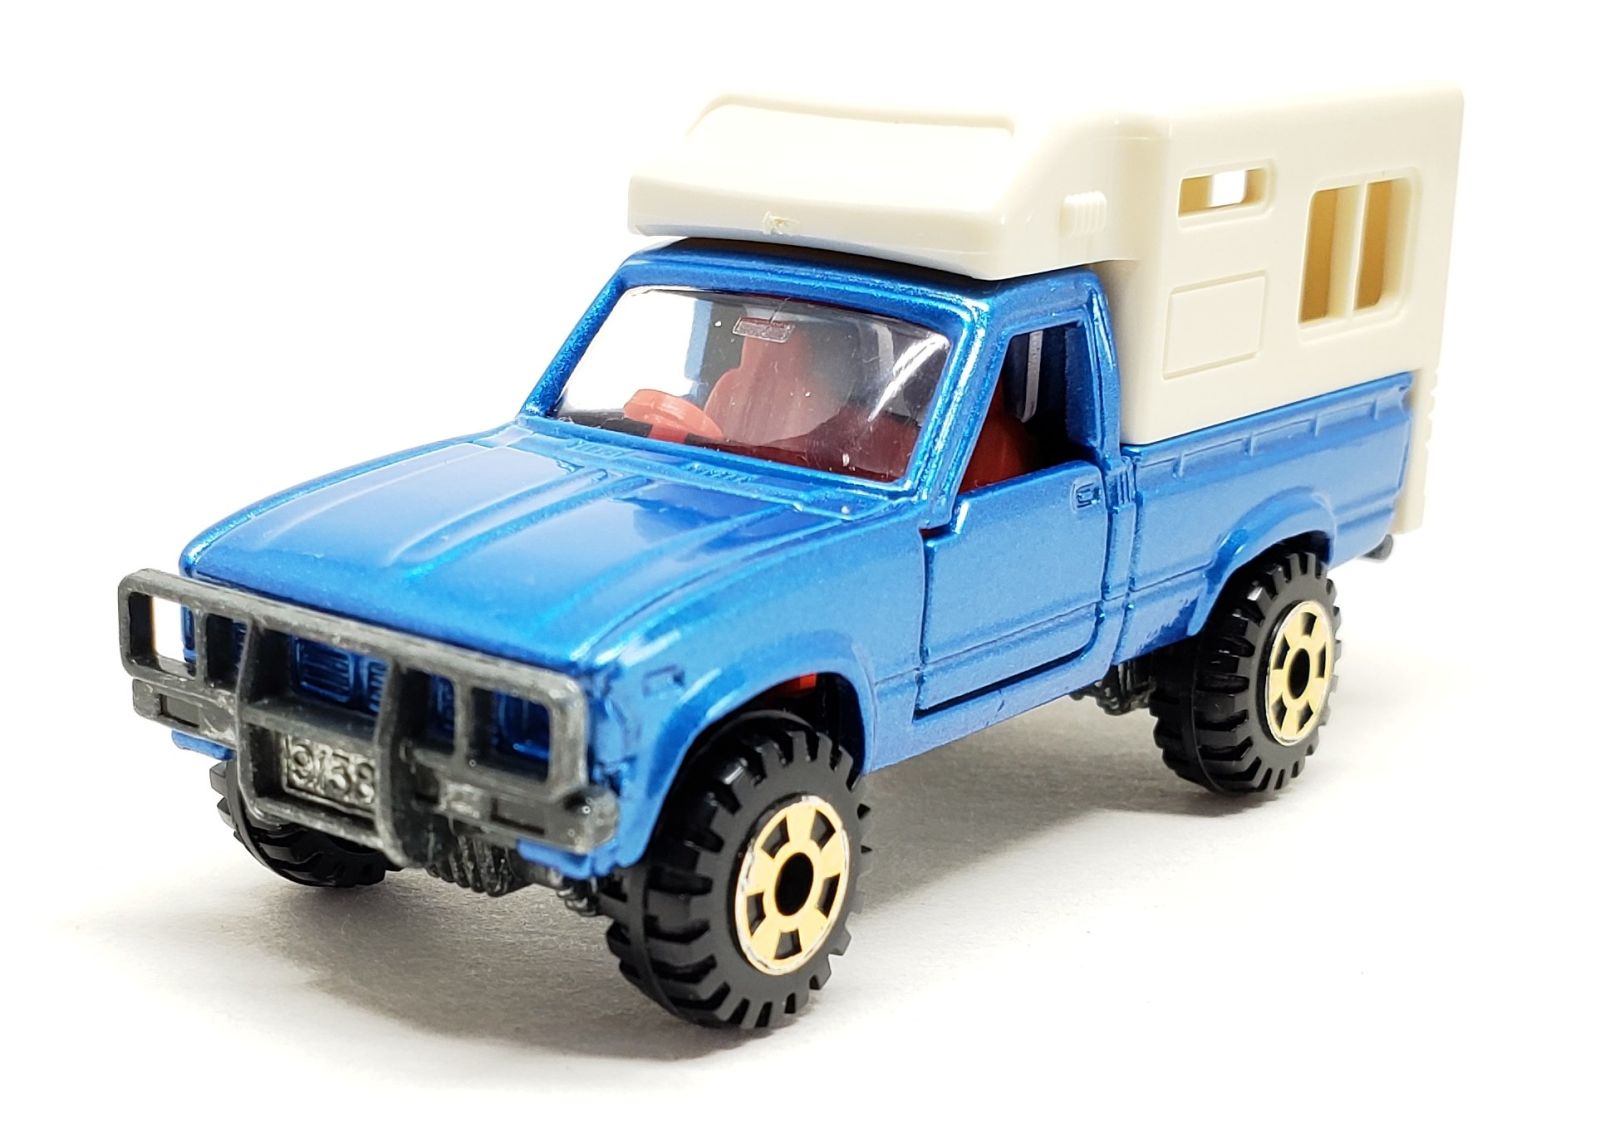 Illustration for article titled [REVIEW] Tomica Toyota Hilux Camping Car